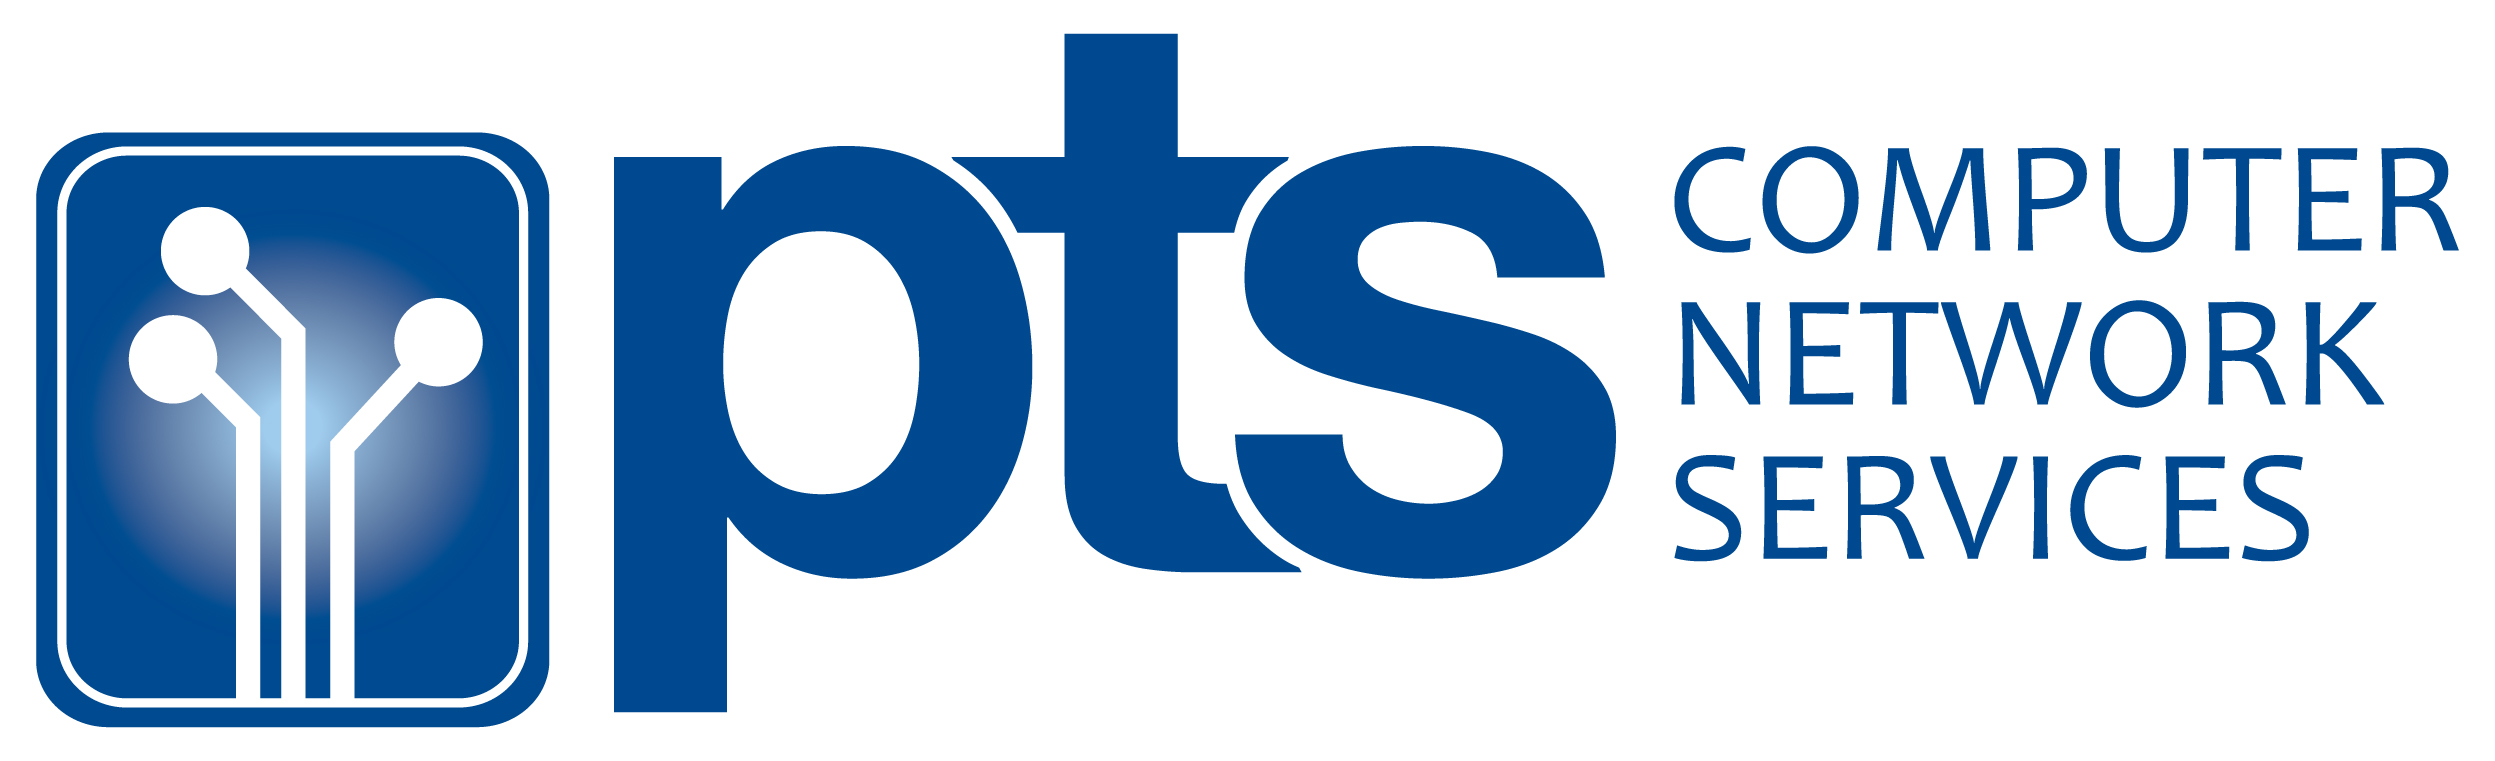 PTS logo with text